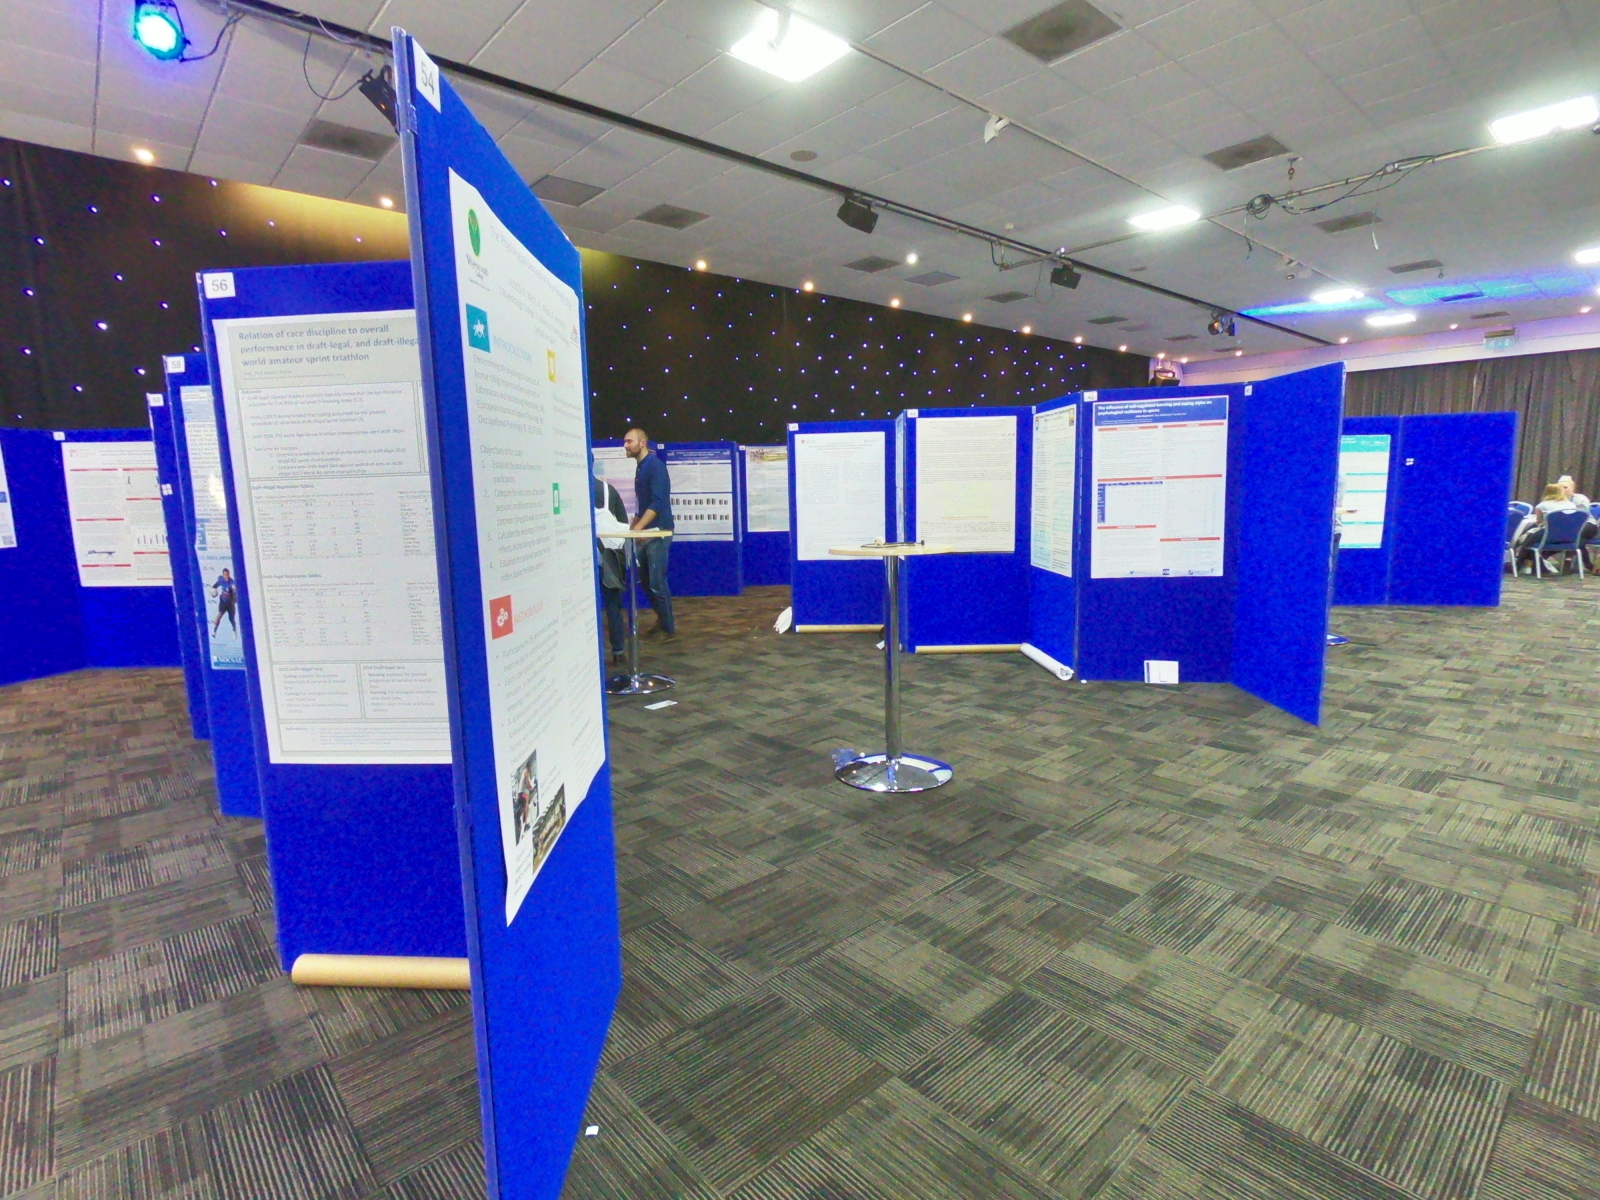 Poster discussions and exhibition - BASES 2017